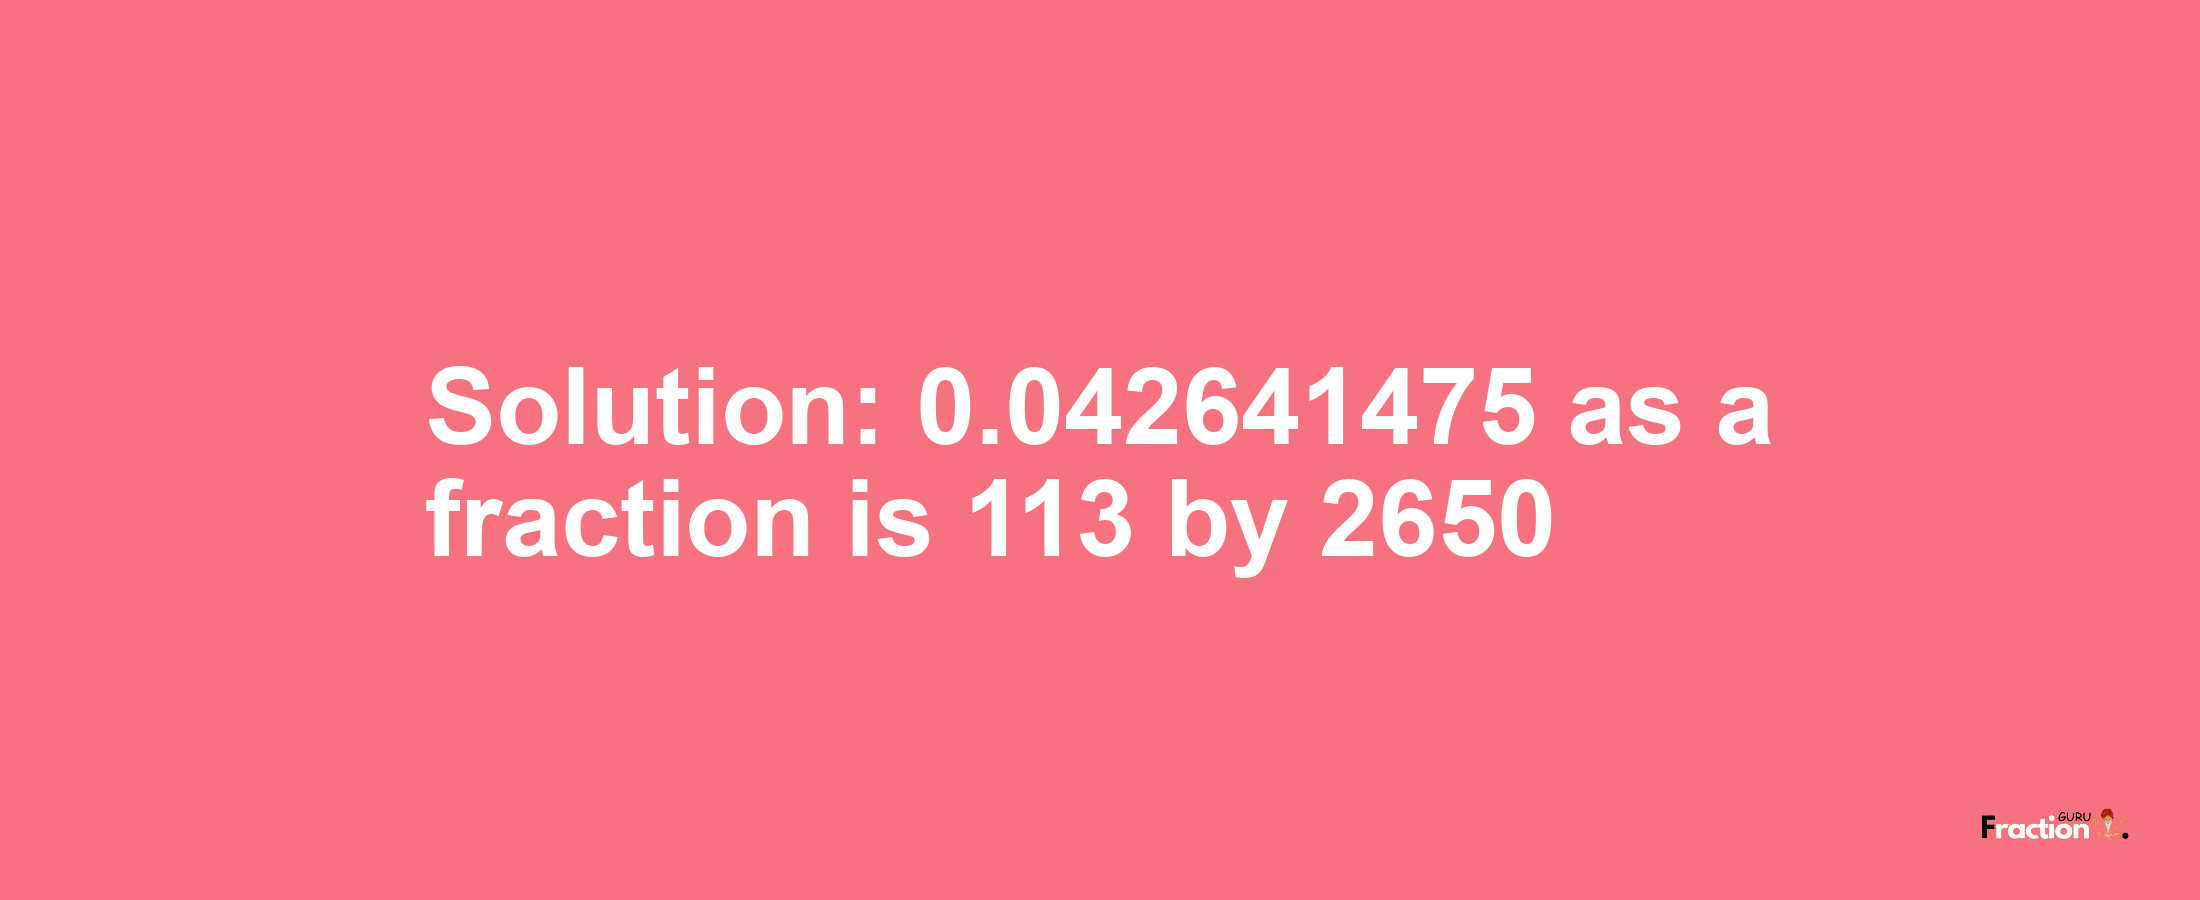 Solution:0.042641475 as a fraction is 113/2650